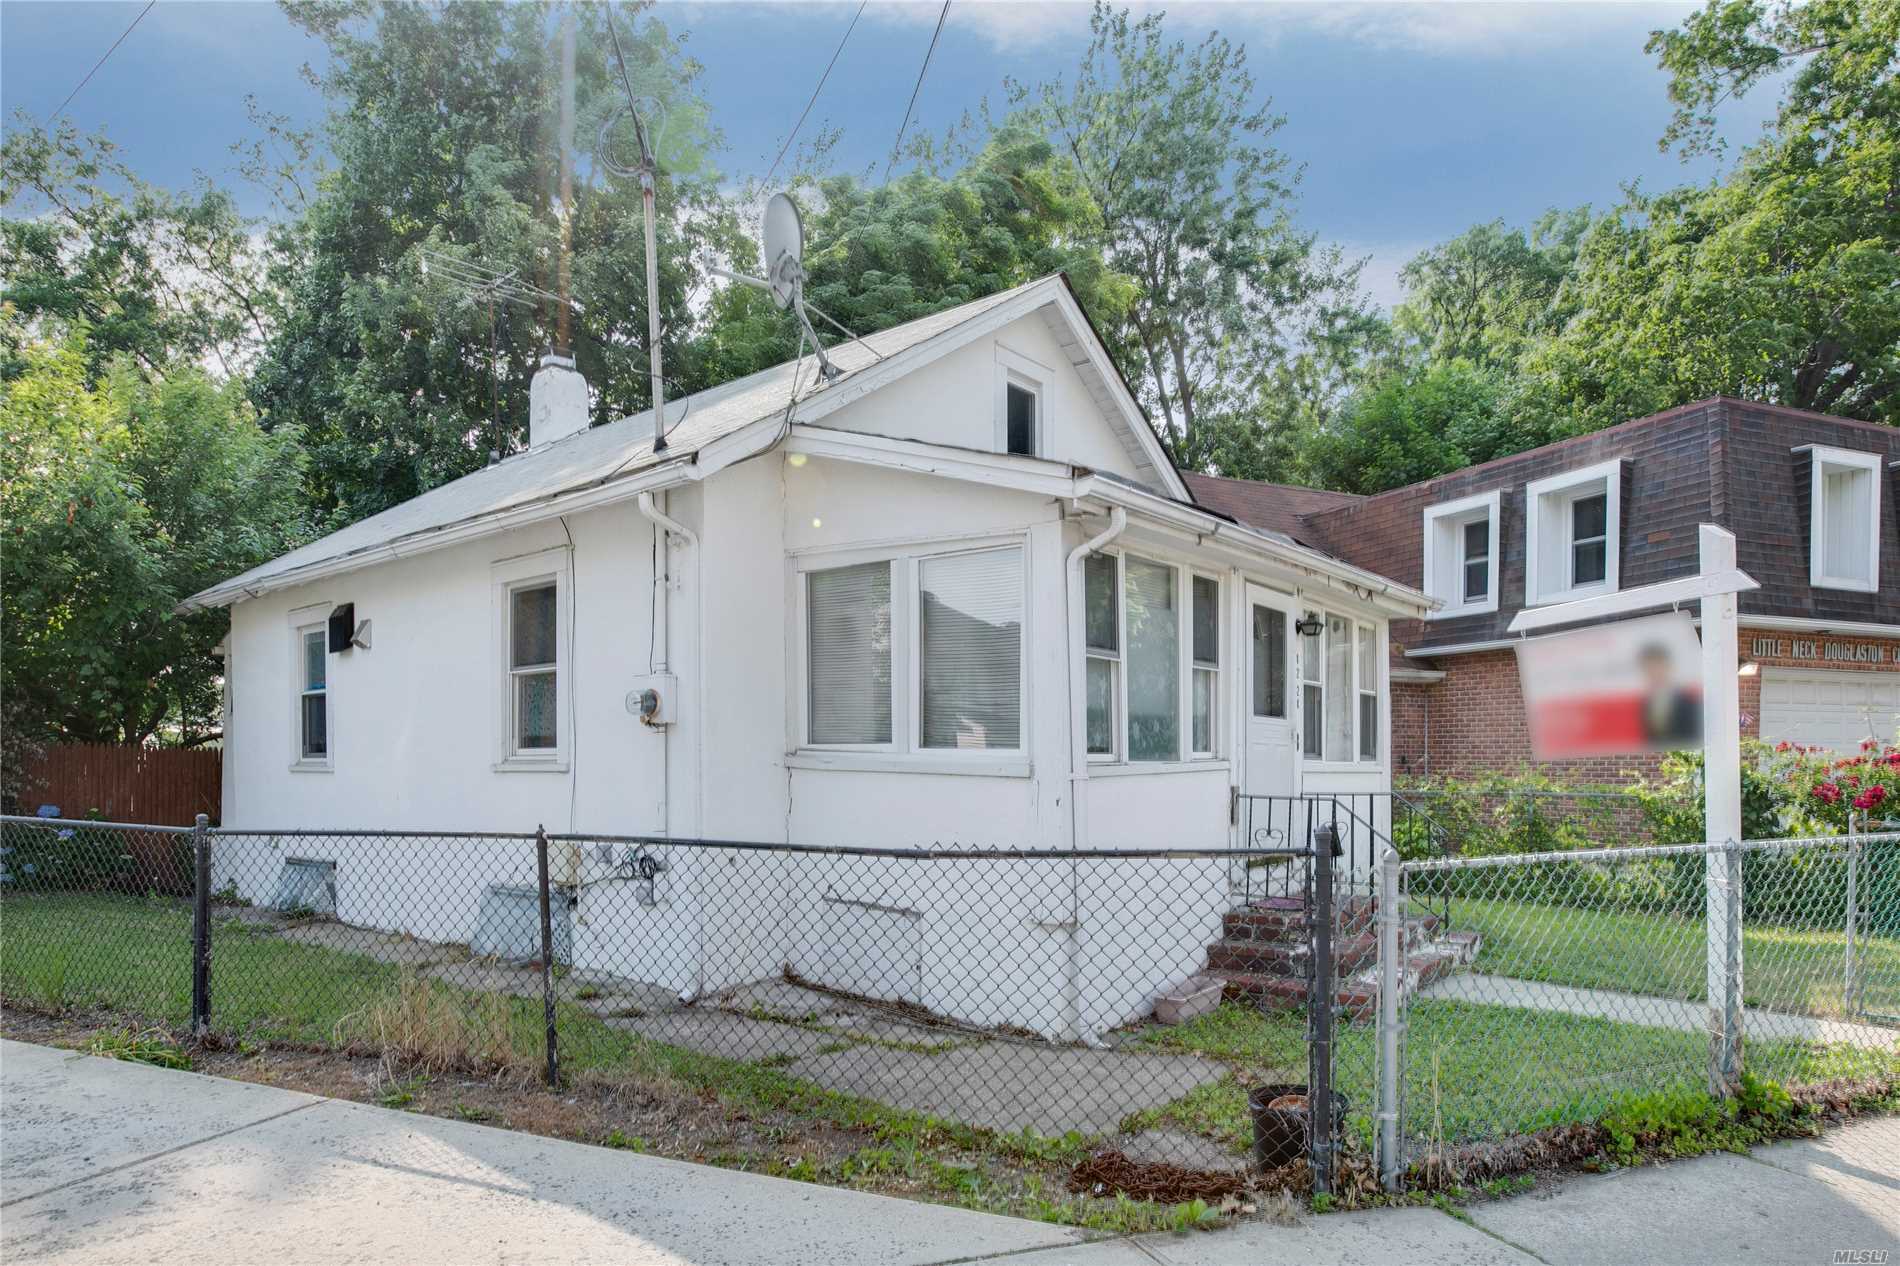 Great Opportunity For A Starter Home Or Rental Income Investment. Can&rsquo;t Beat The Location, 0.4 Miles To Lirr Little Neck Station, 1 Block To Northern Blvd And Q12, Qm3, N20, N20G, Restaurants, Post Office, Stop & Shop Supermarkets, Etc. Ps 94 David D Porter Is 1 Block Away.